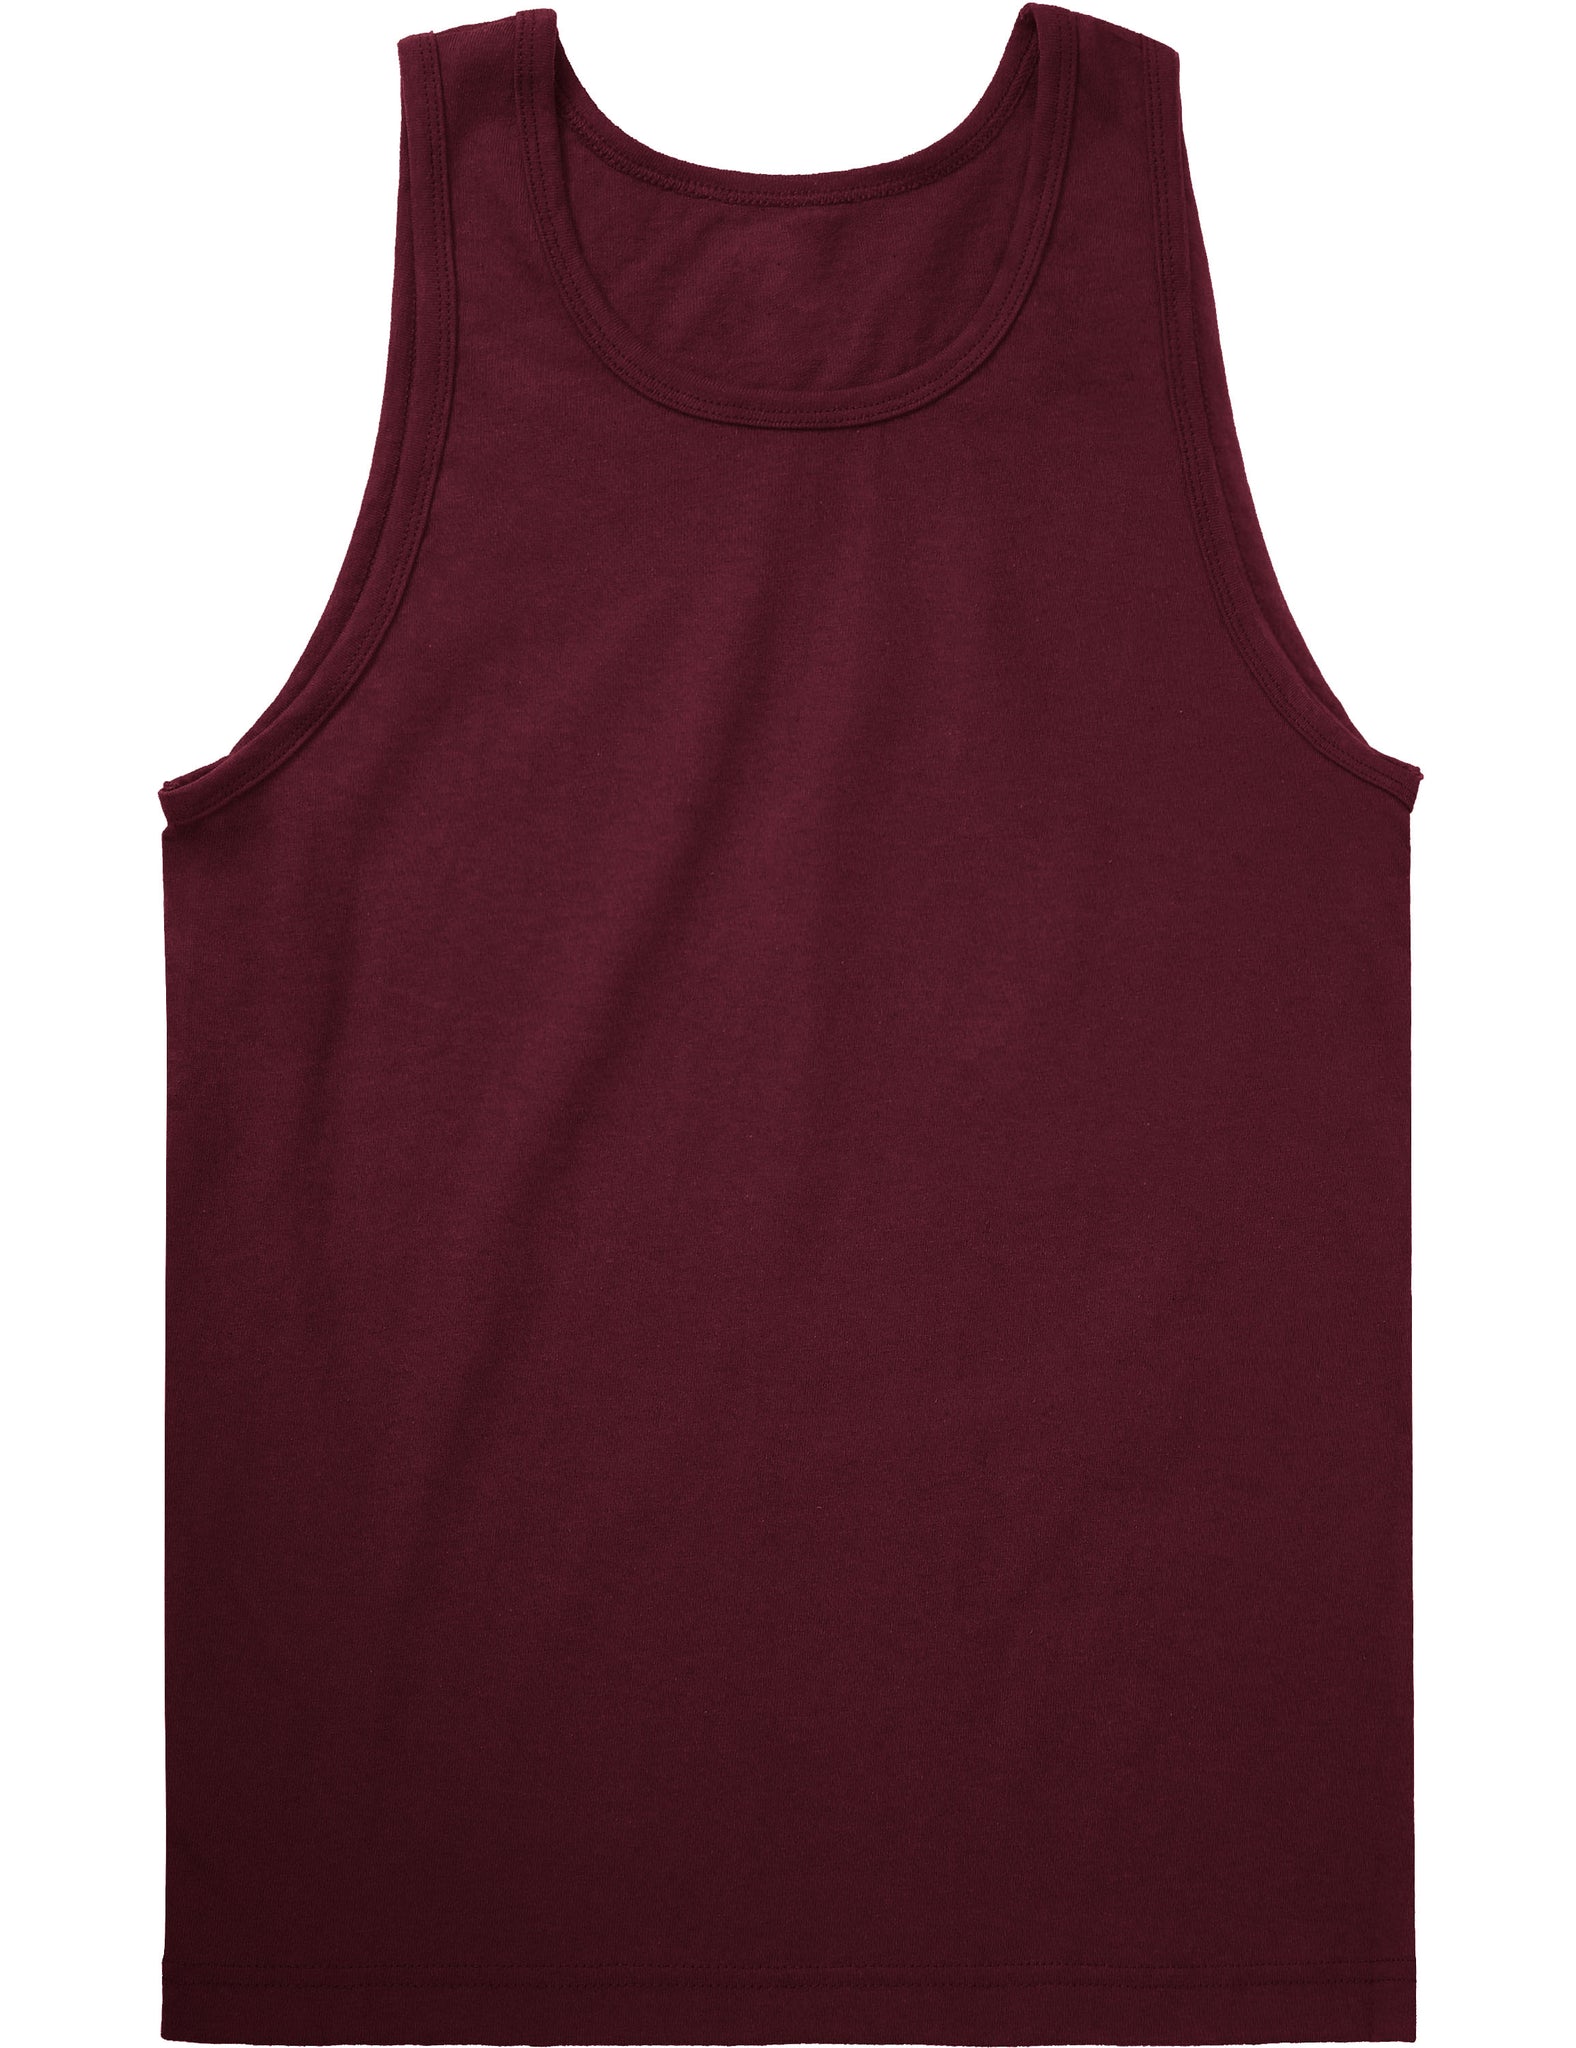 Mens Muscle Fit Tank Top - Shirts & Tops